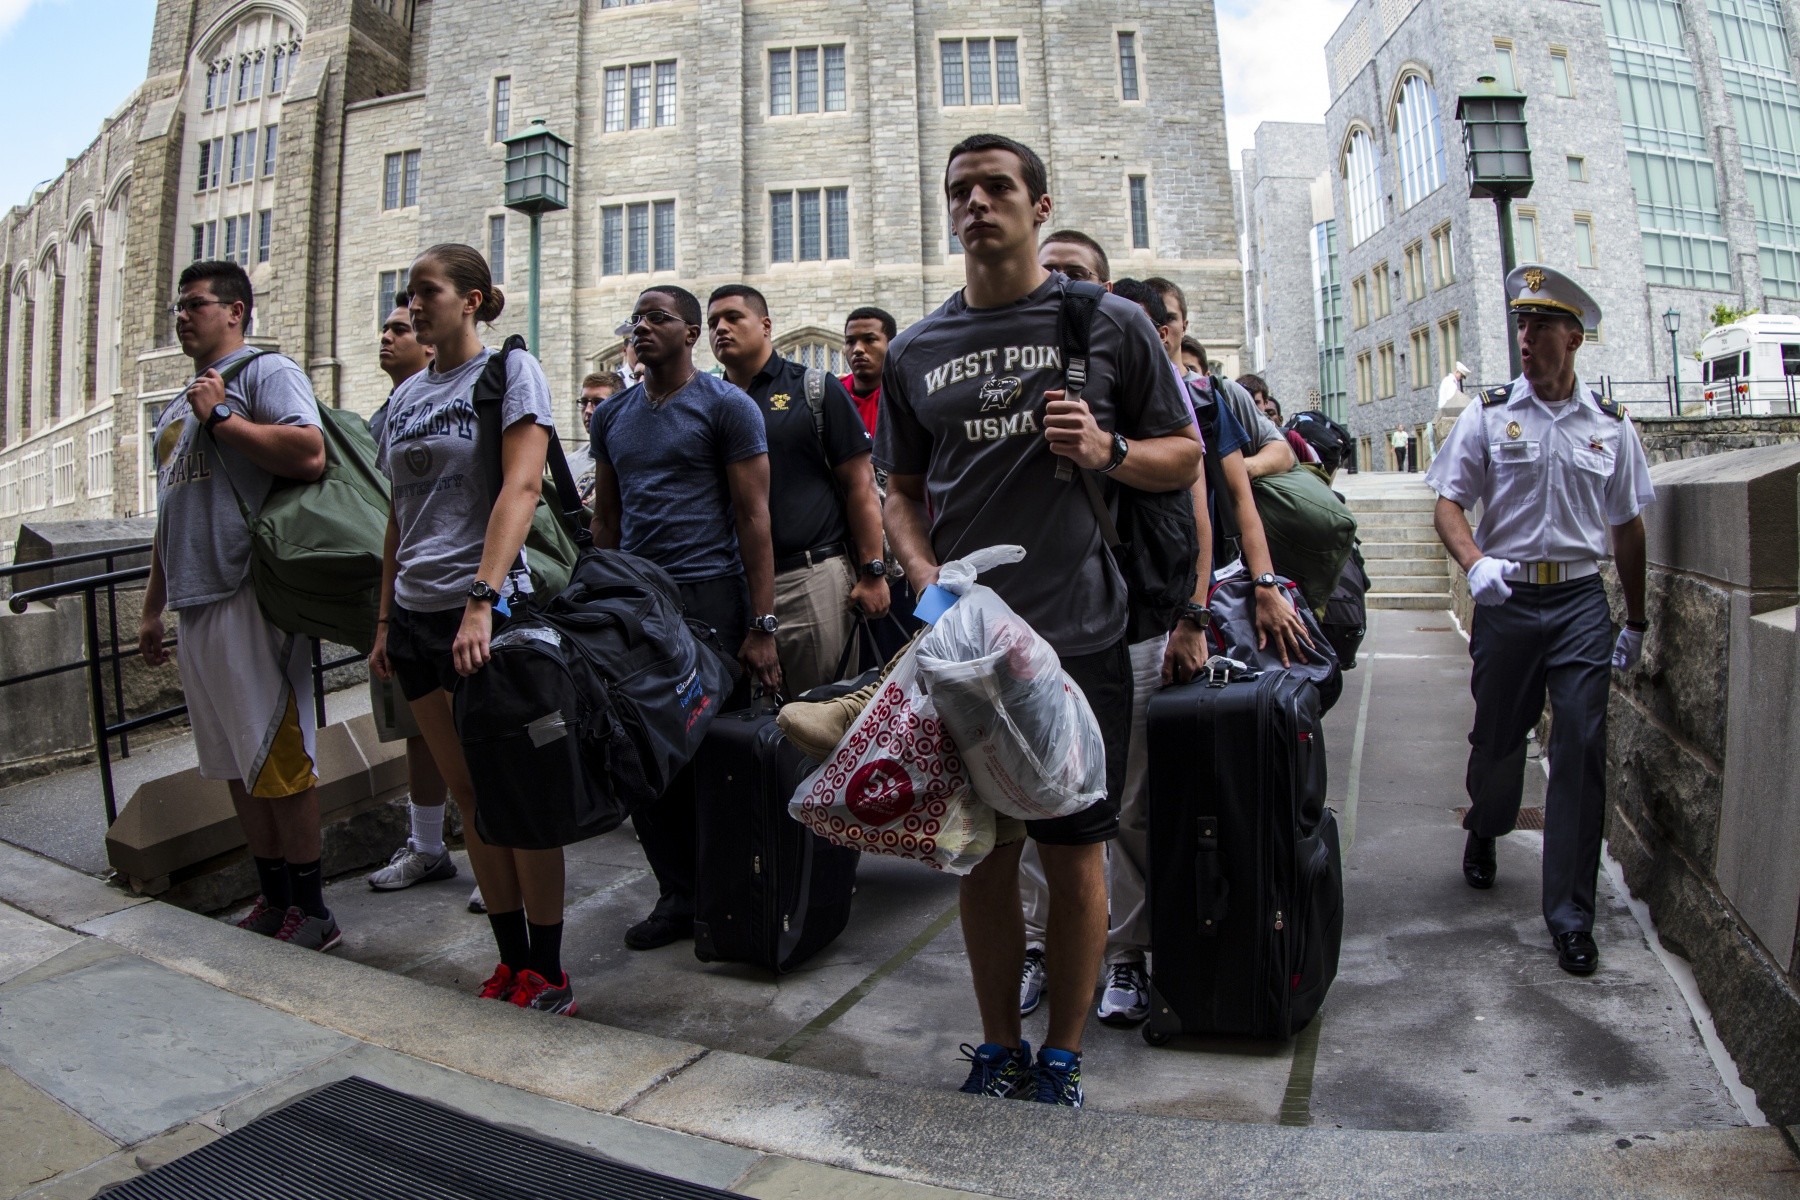 West Point welcomes future cadets on R-day | Article | The United